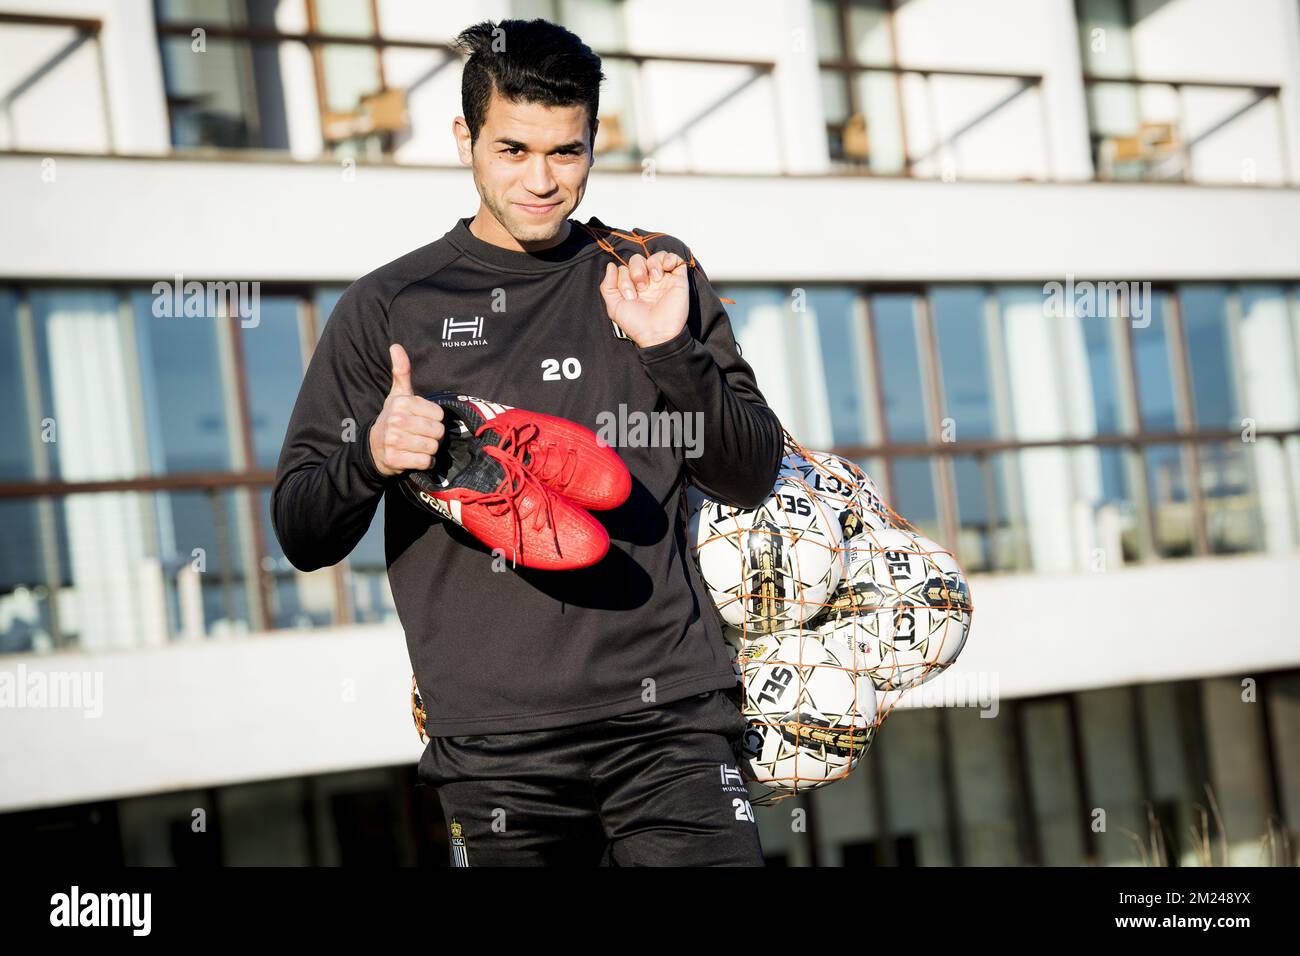 Hamdi Harbaoui as he arrives the first day of the winter training camp of Belgian first division soccer team Sporting Charleroi in El Saler, Spain, Sunday 08 January 2017. BELGA PHOTO JASPER JACOBS Stock Photo